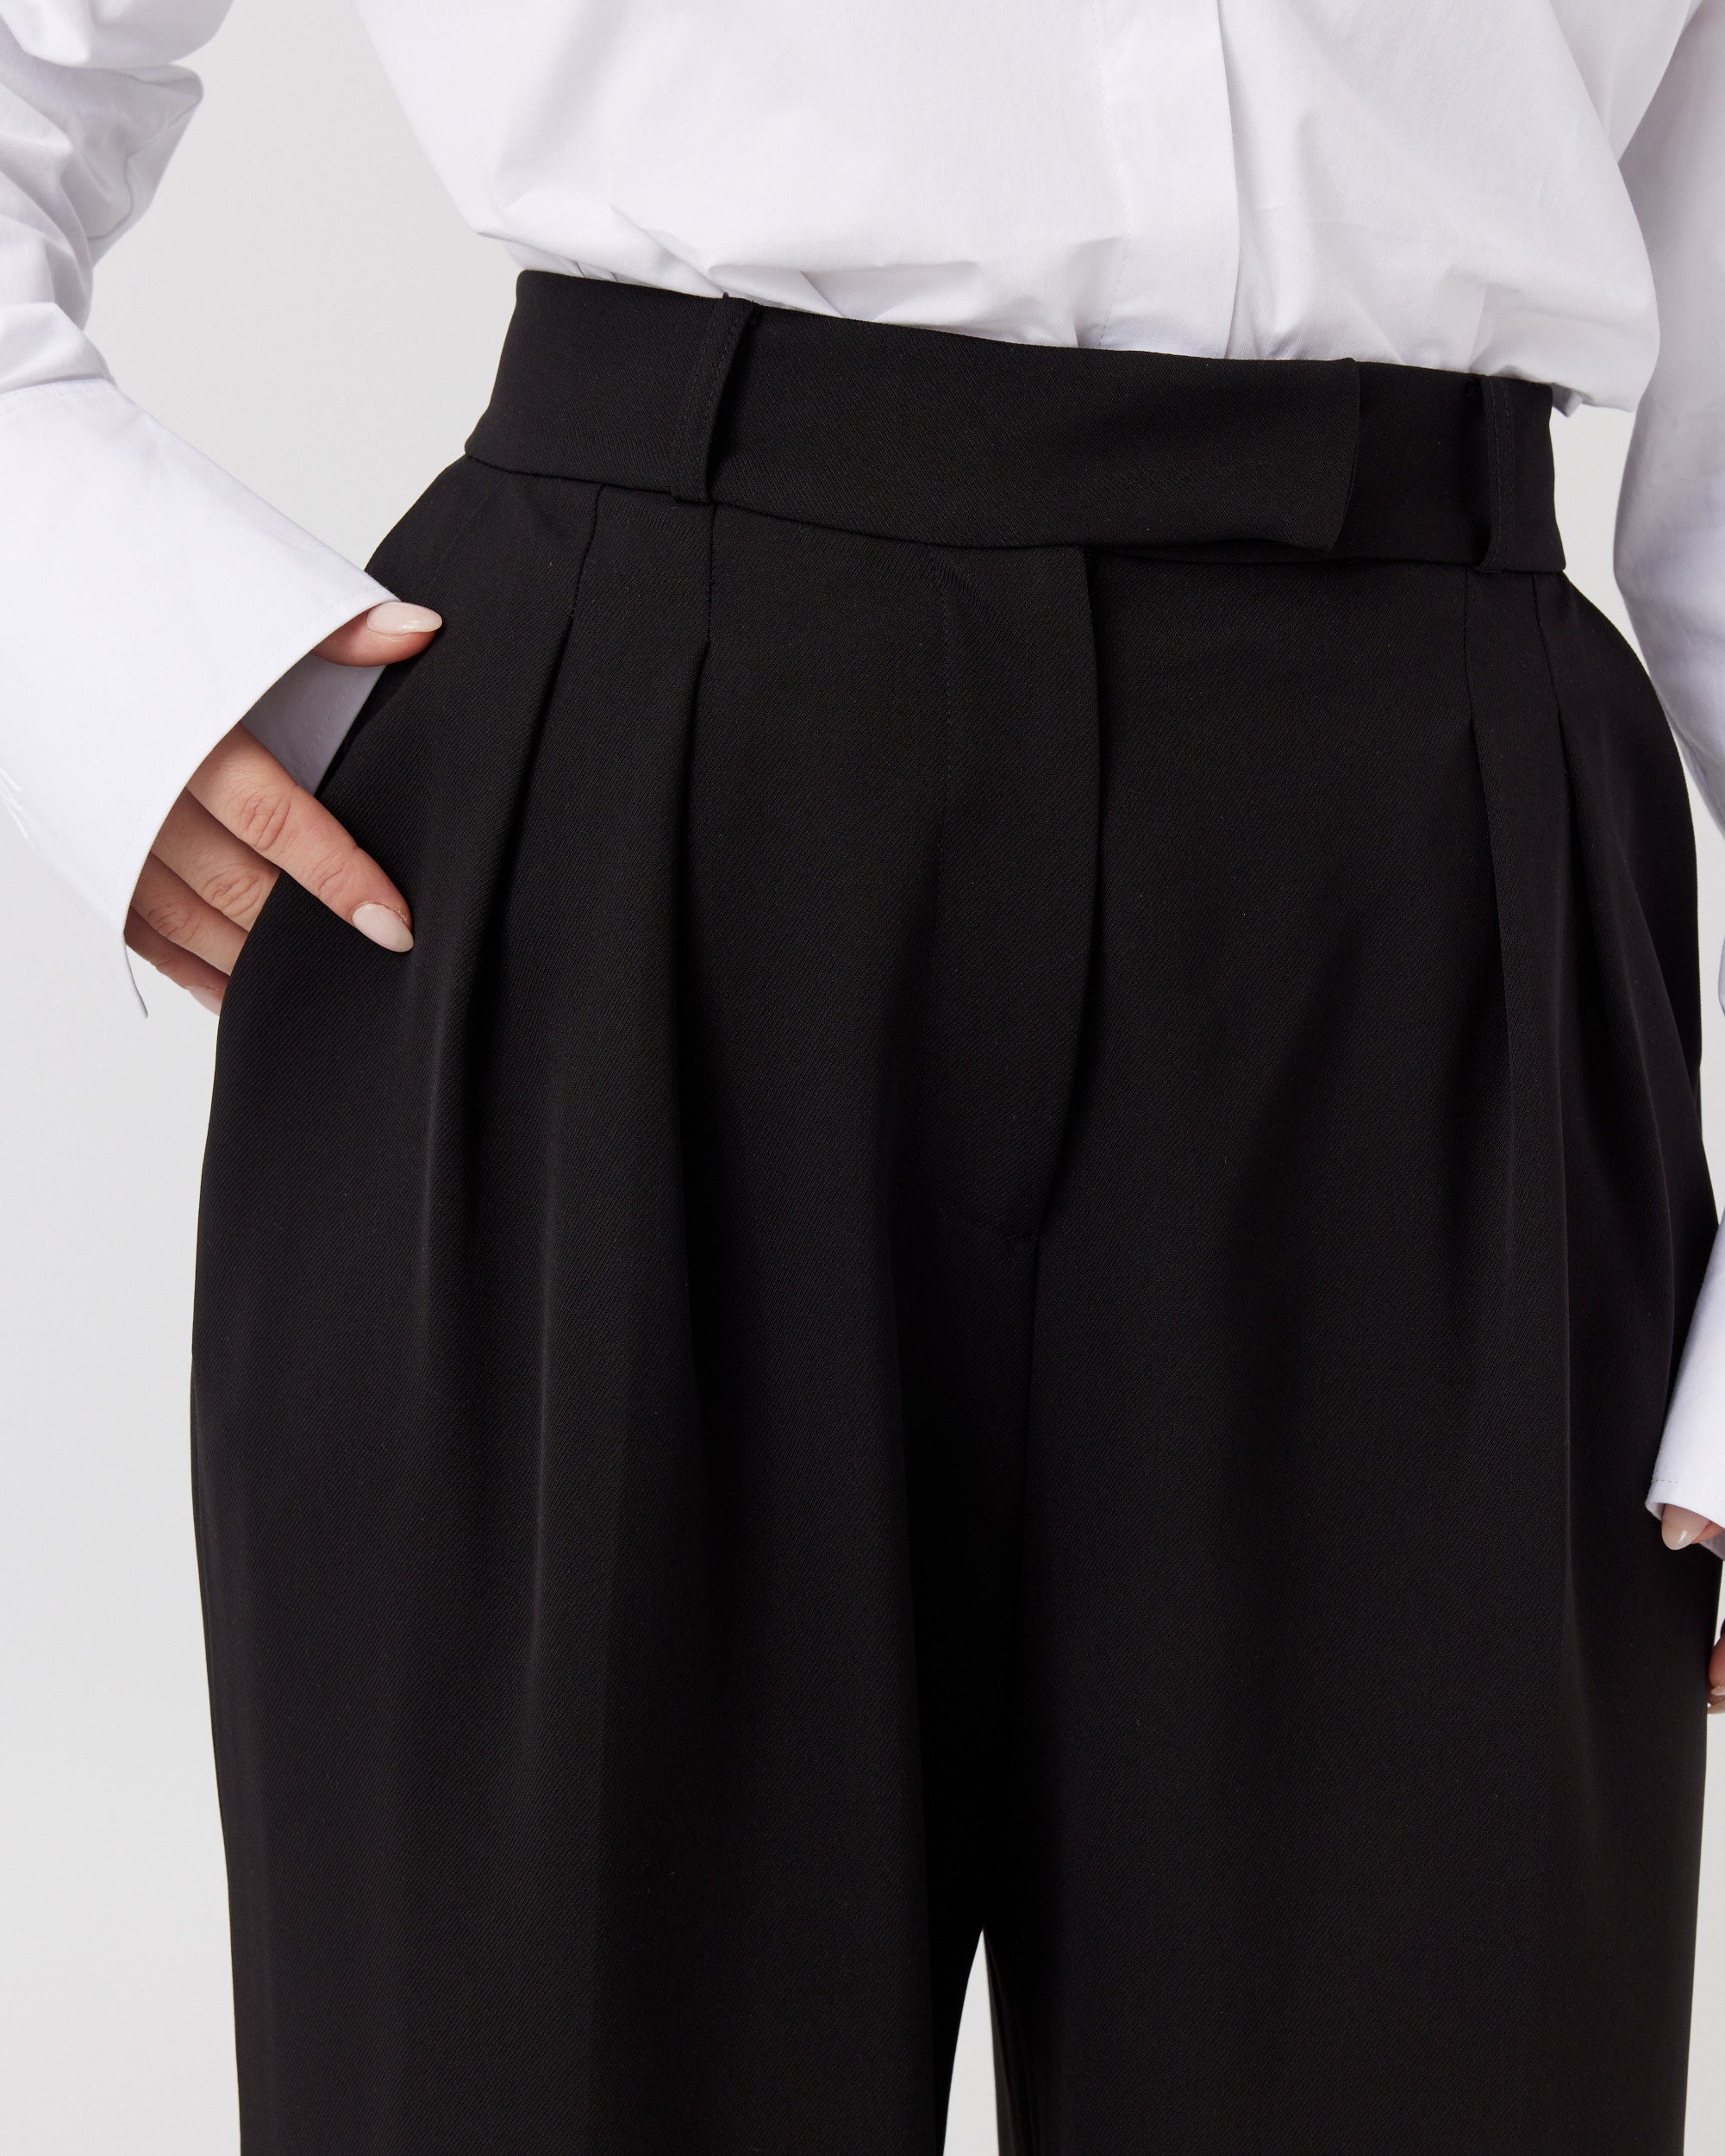 Close up image of the waist band of a curvaceous women wearing a pair of minimalistic high waisted wide leg trousers in black. Waistband shows darting and pleating on either side which creates a elegant drape of the fabric over the body